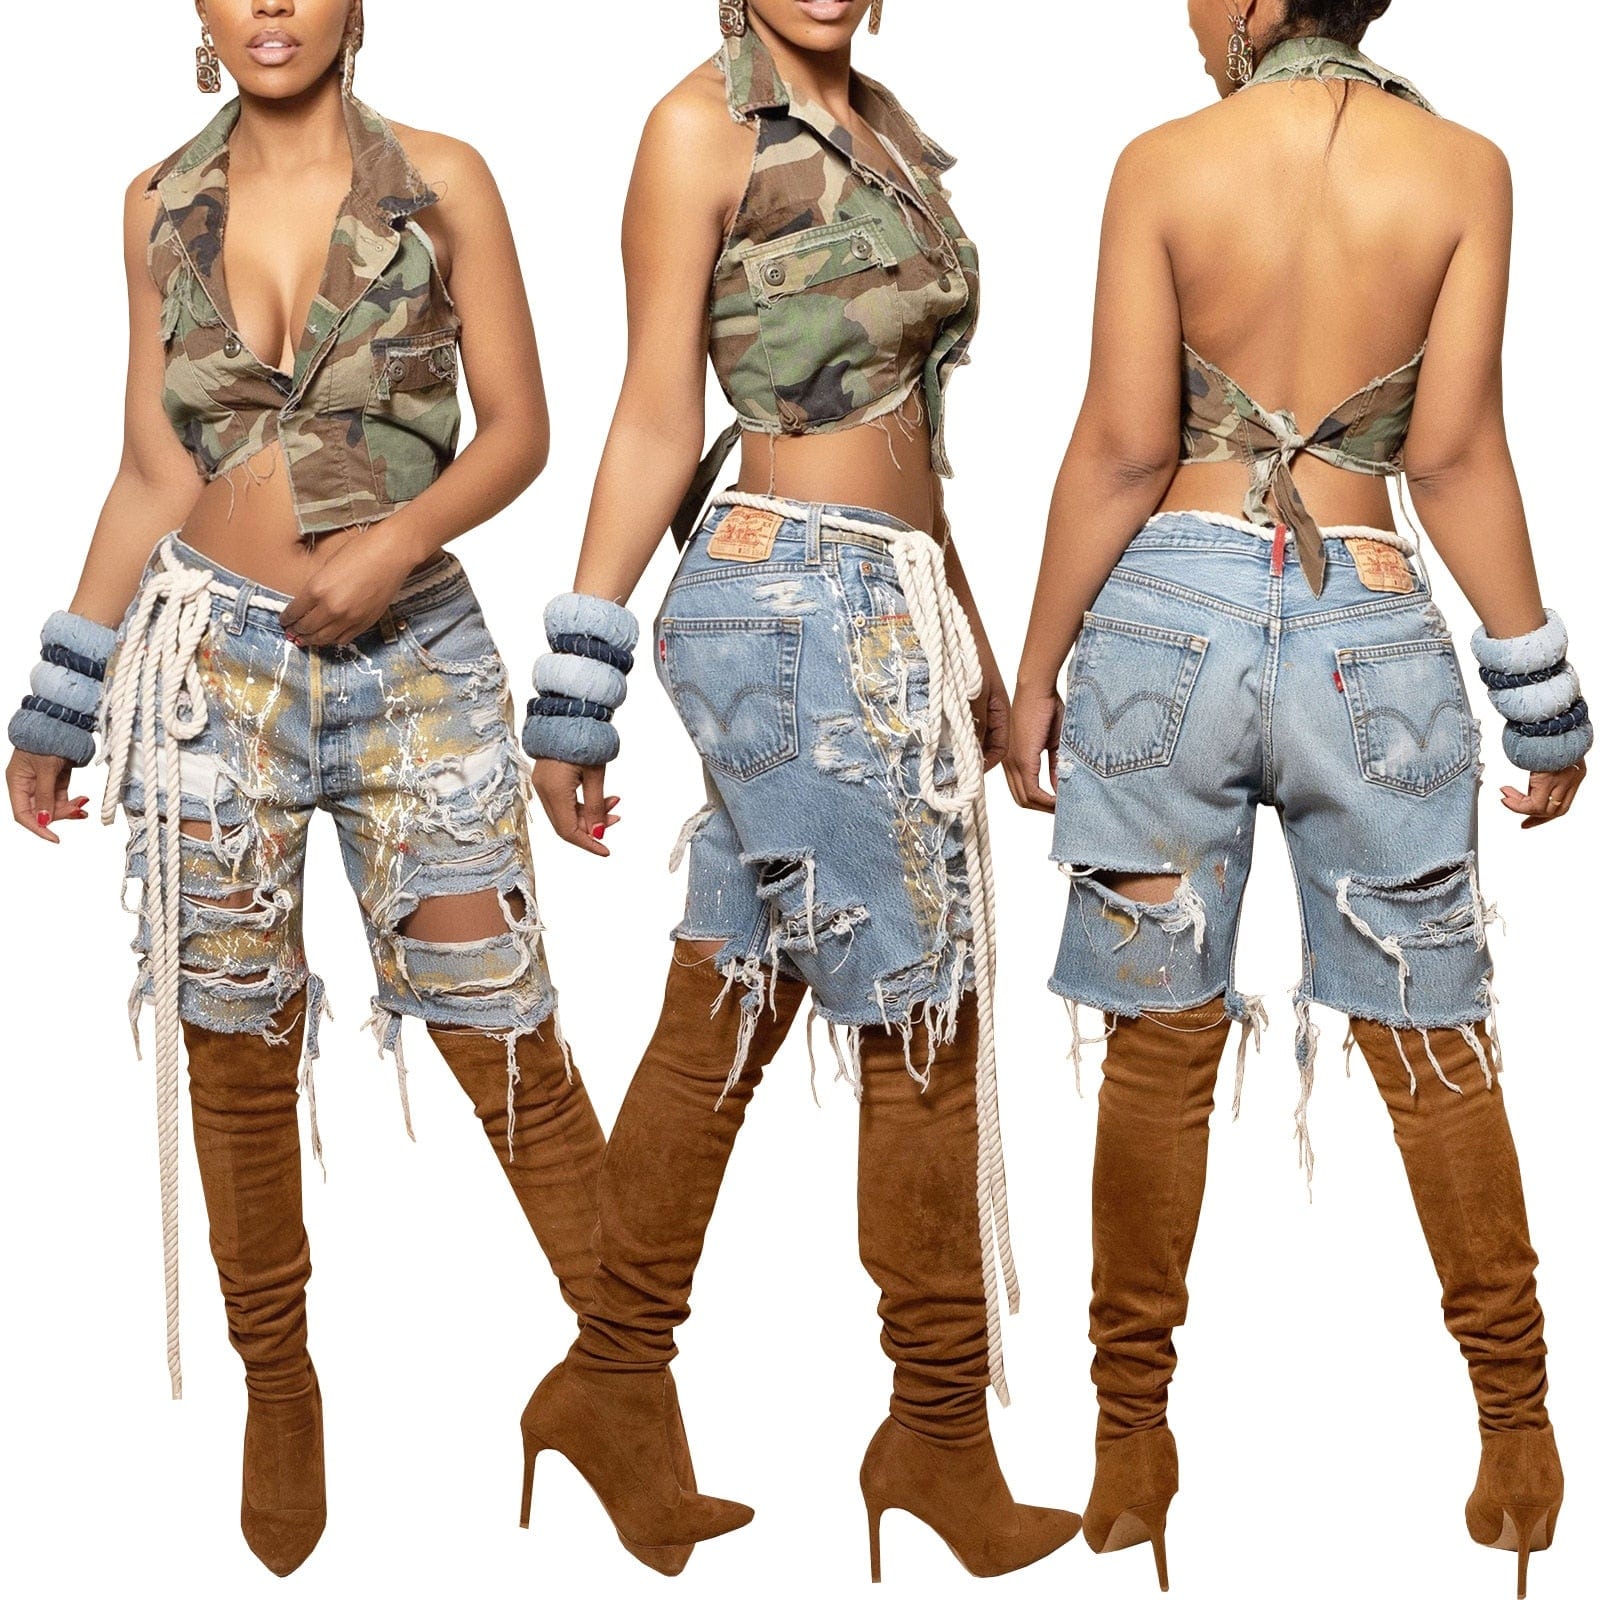 Teonclothingshop Women's Casual Knee-Length Distressed Ripped High Waisted Street Jeans